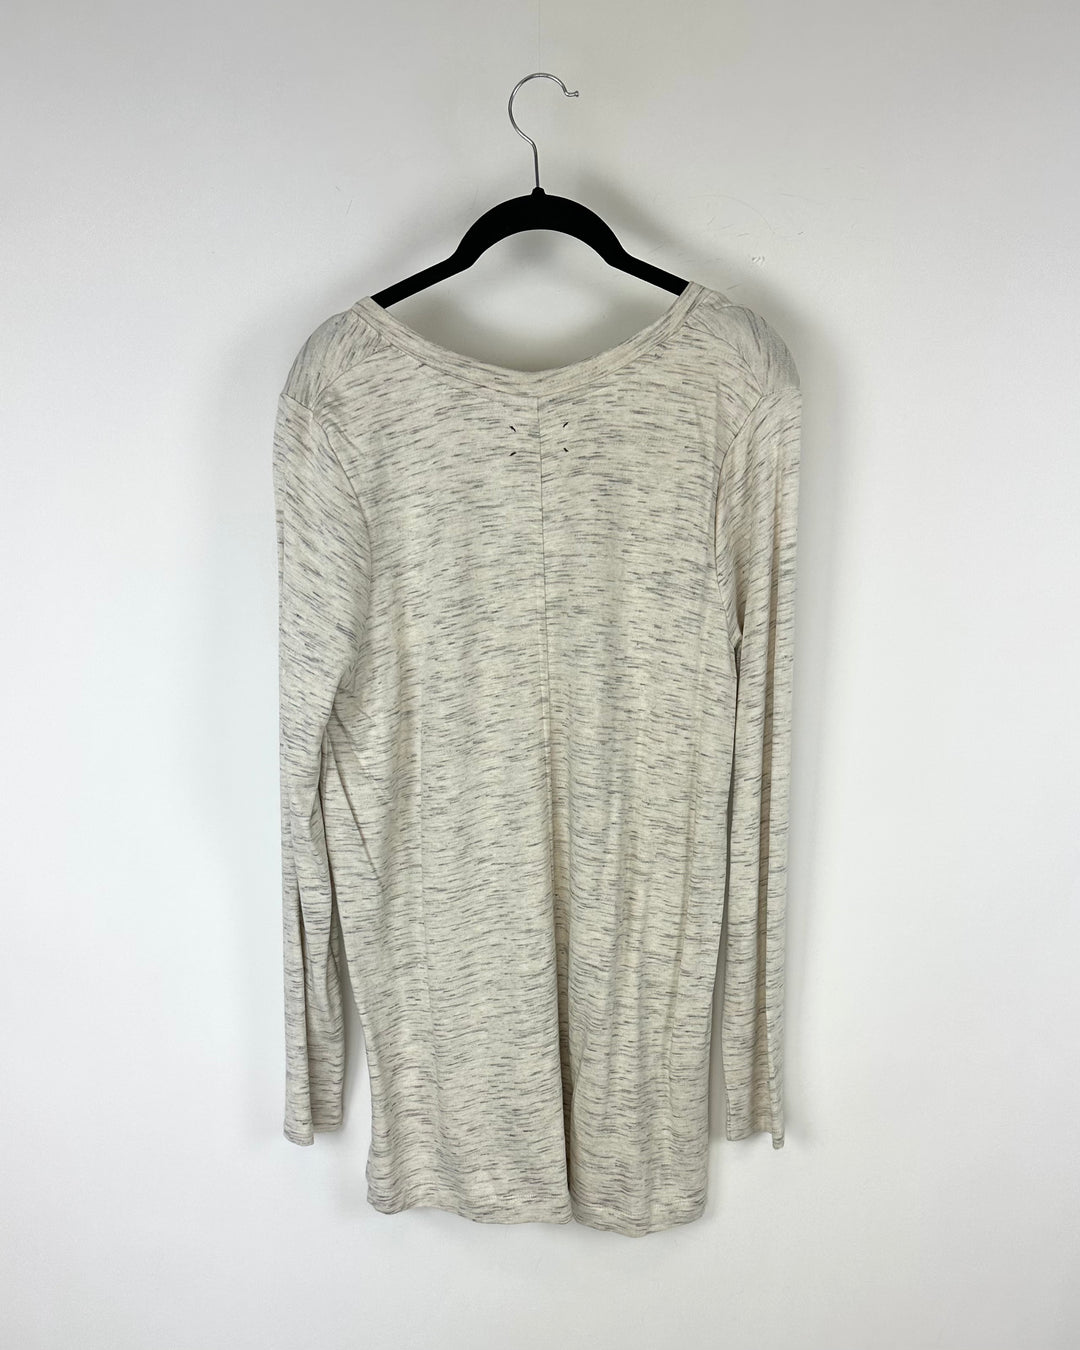 White and Grey Long Sleeve Top - Small